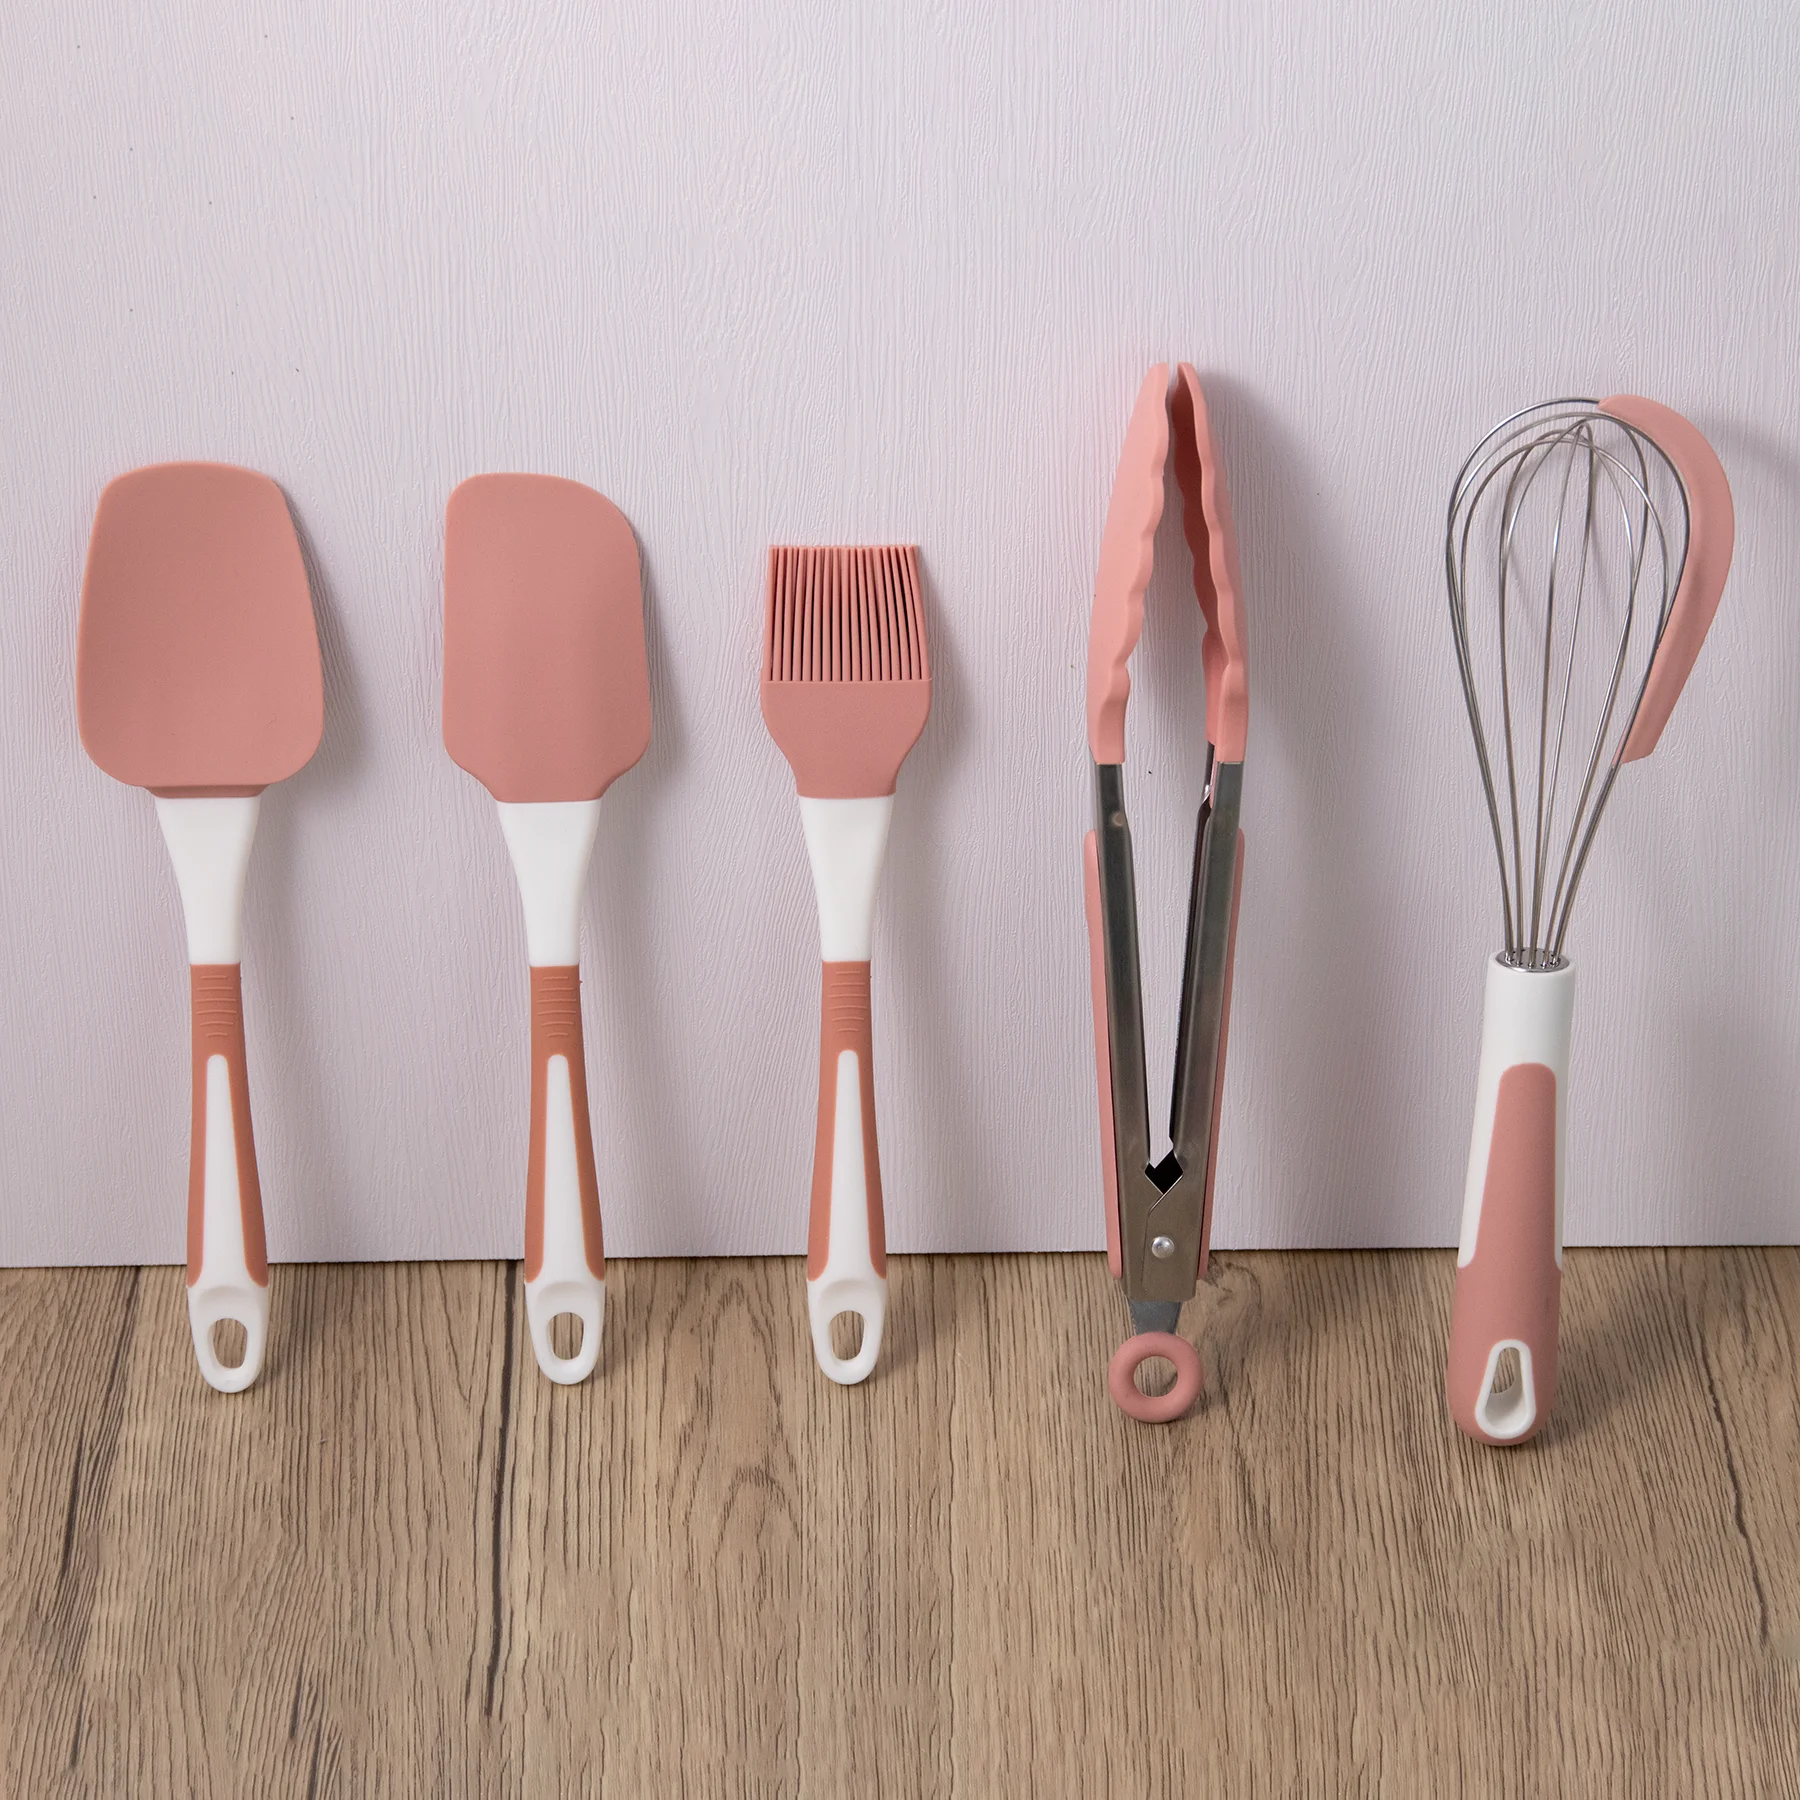 High Quality Non-Stick Silicone Multifunctional Baking Utensils Kitchen  Gadgets Tools Set